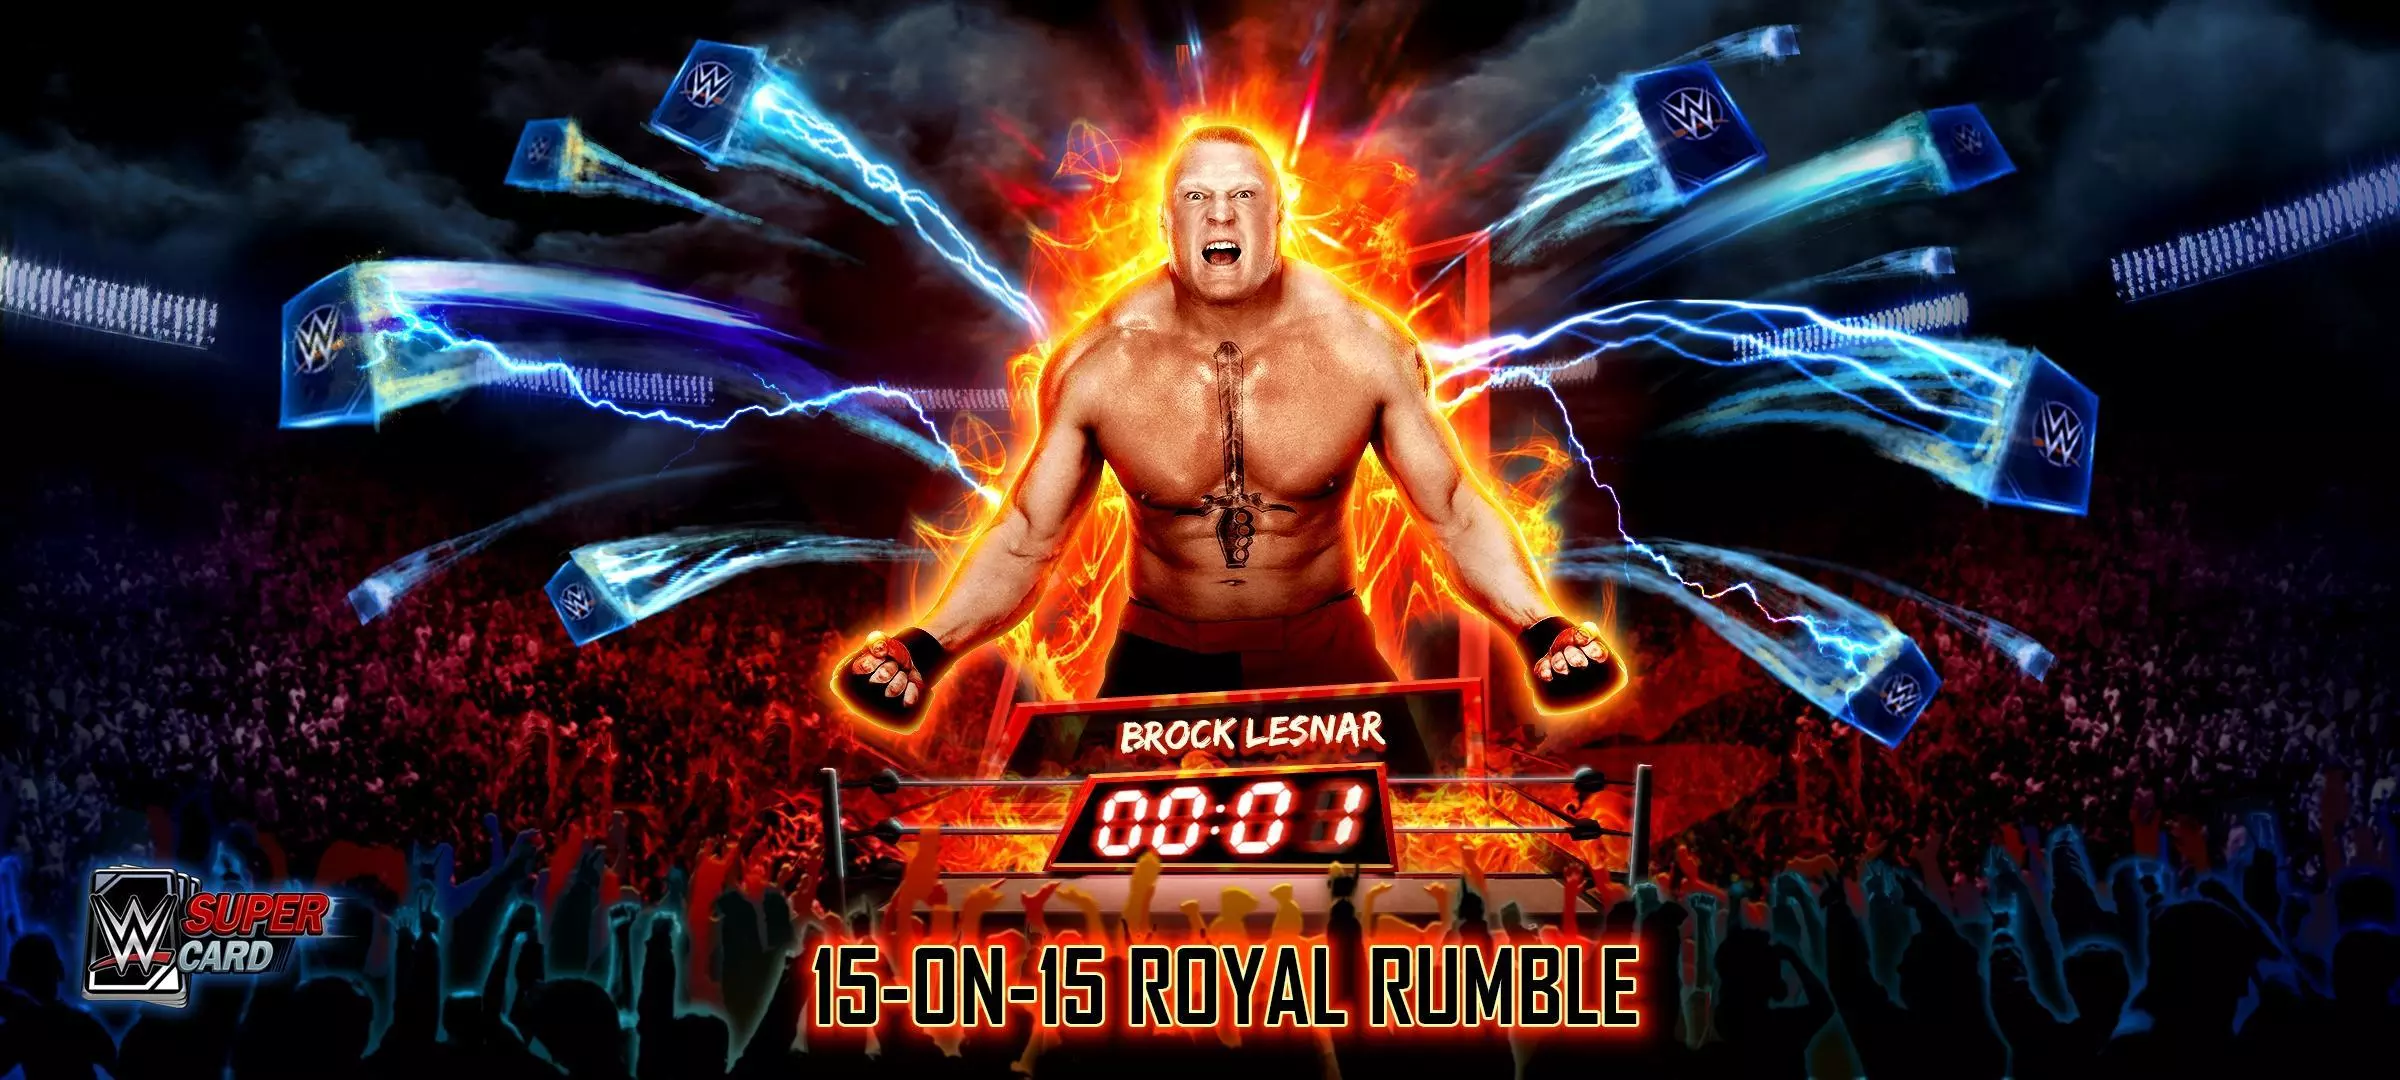 WWE SuperCard introduces Royal Rumble mode as part of Season 3